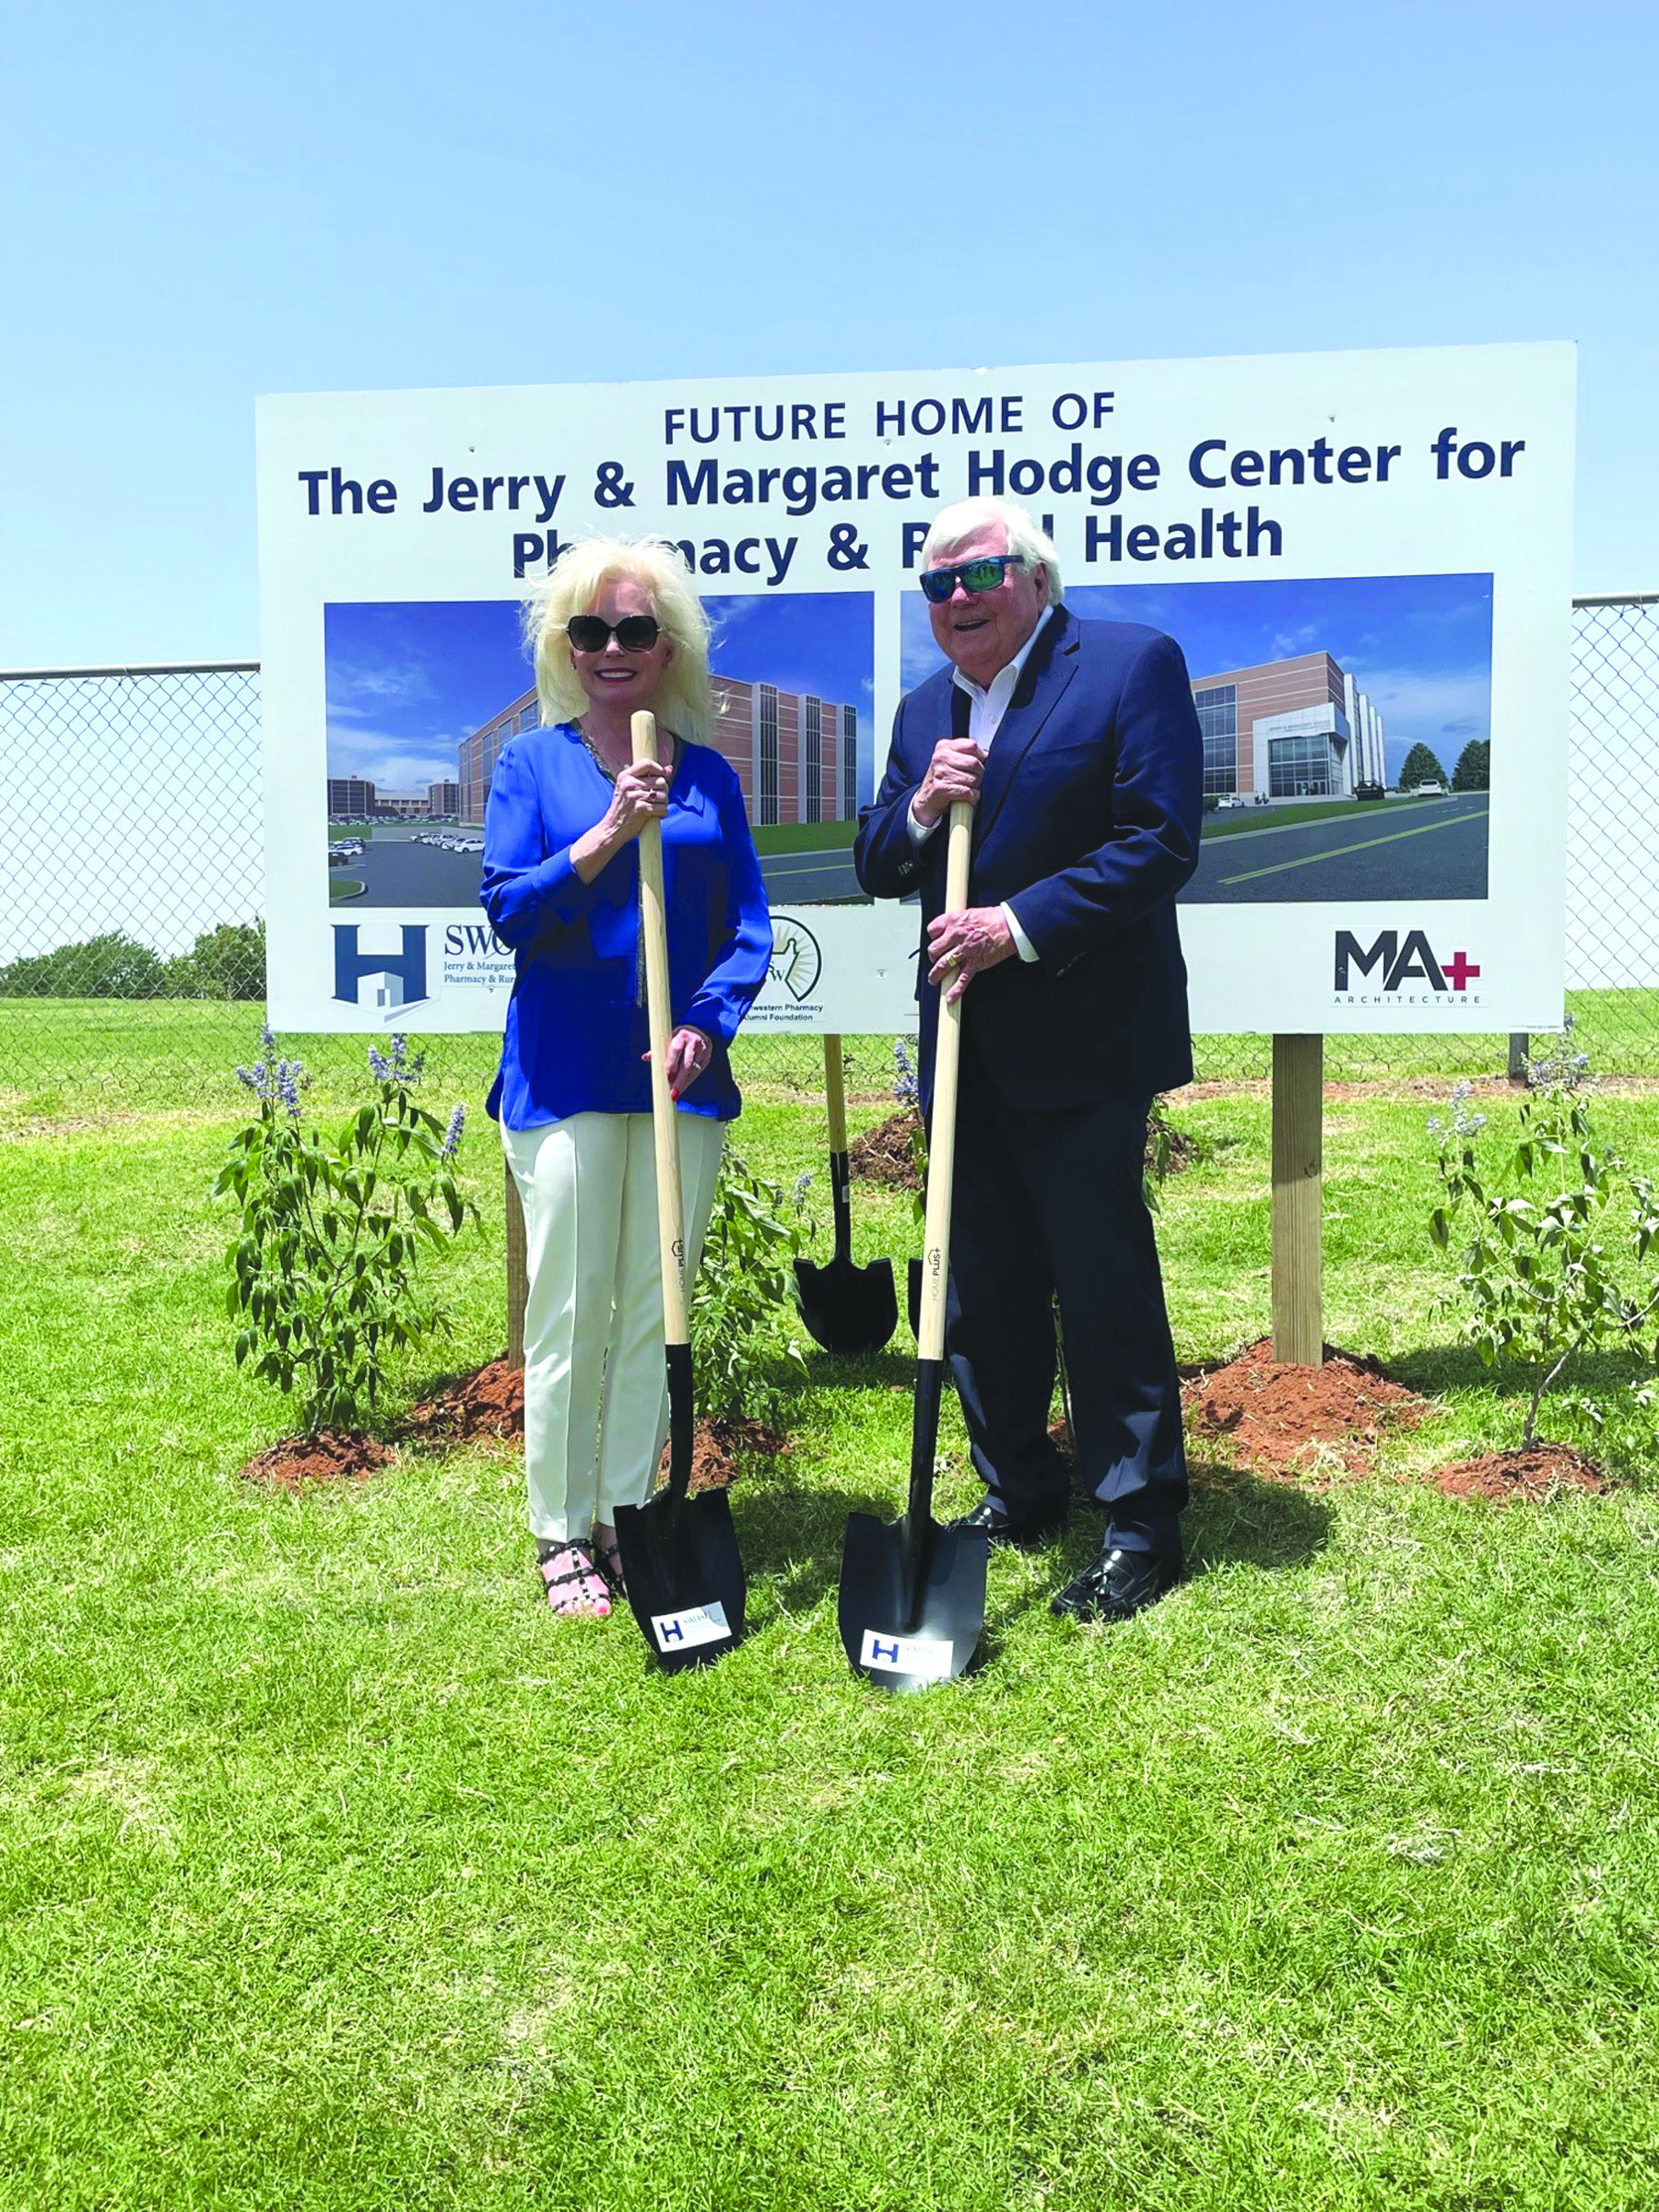 Margaret and Jerry Hodge hold shovels during a groundbreaking ceremony in June for the soon-to-be-built Jerry &amp; Margaret Hodge Center for Pharmacy and Rural Health on SWOSU’s campus. Provided